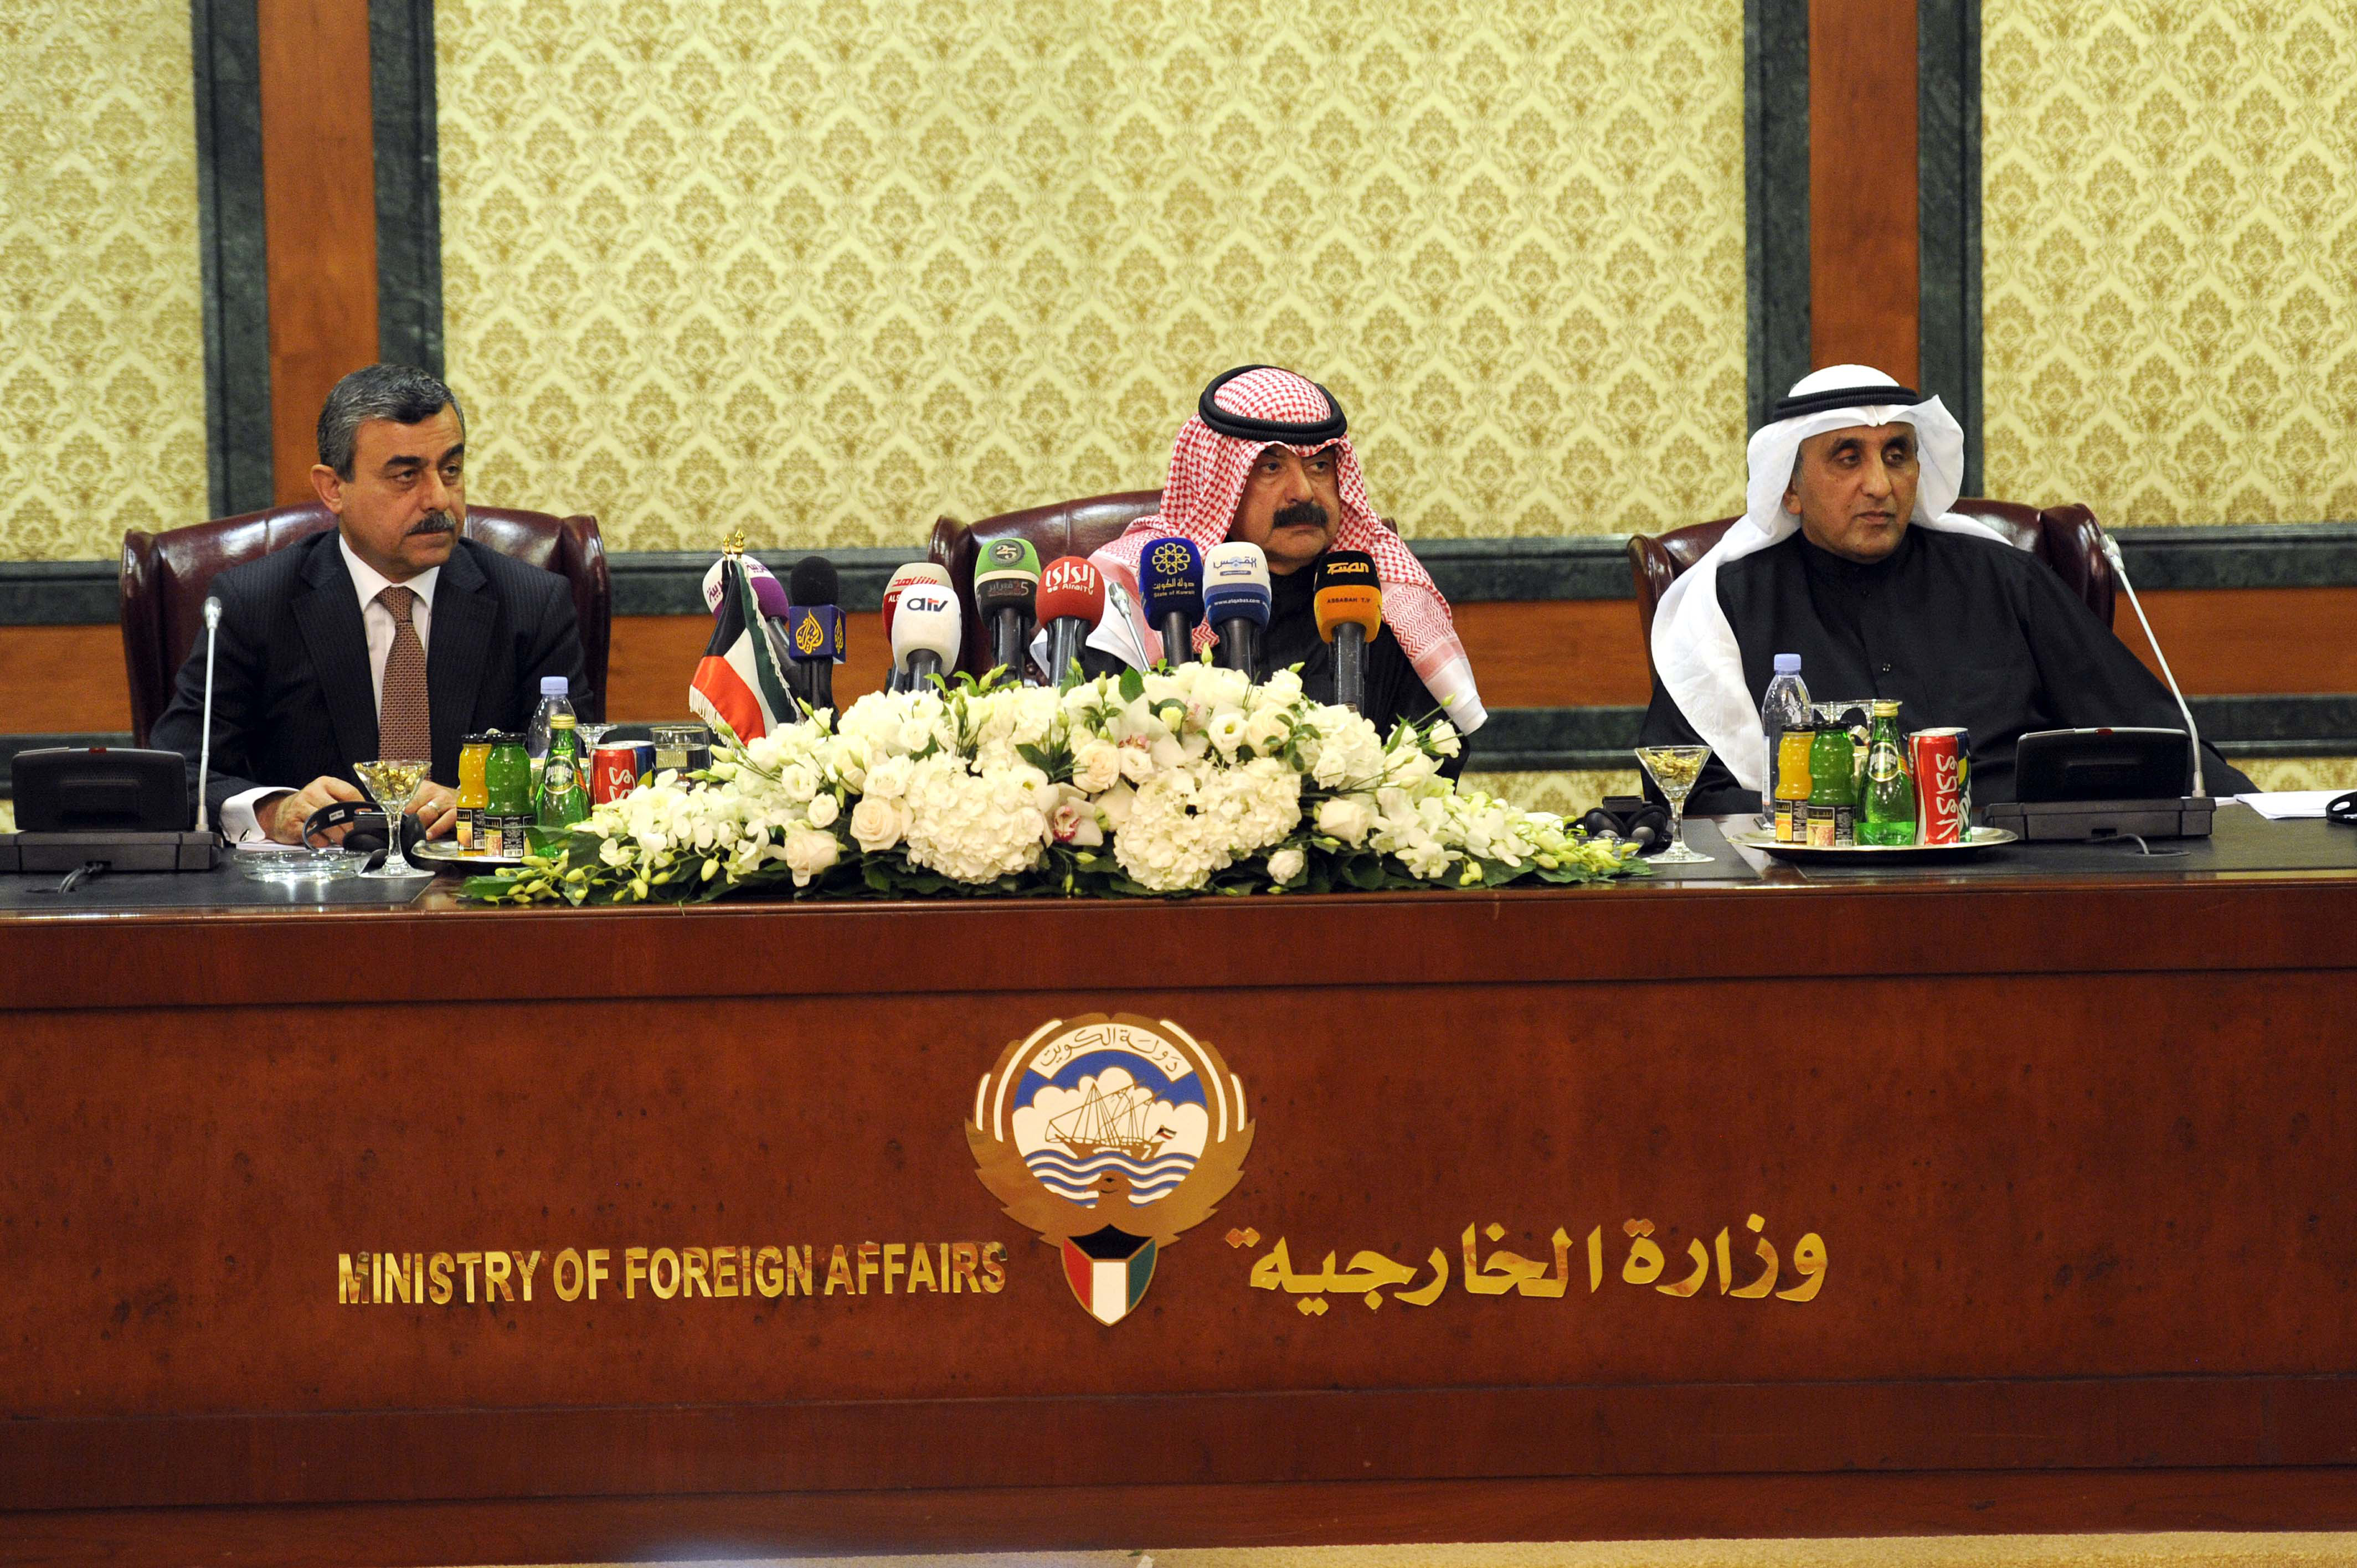 Kuwait's Deputy Foreign Minister Khaled Al-Jarallah during the press conference